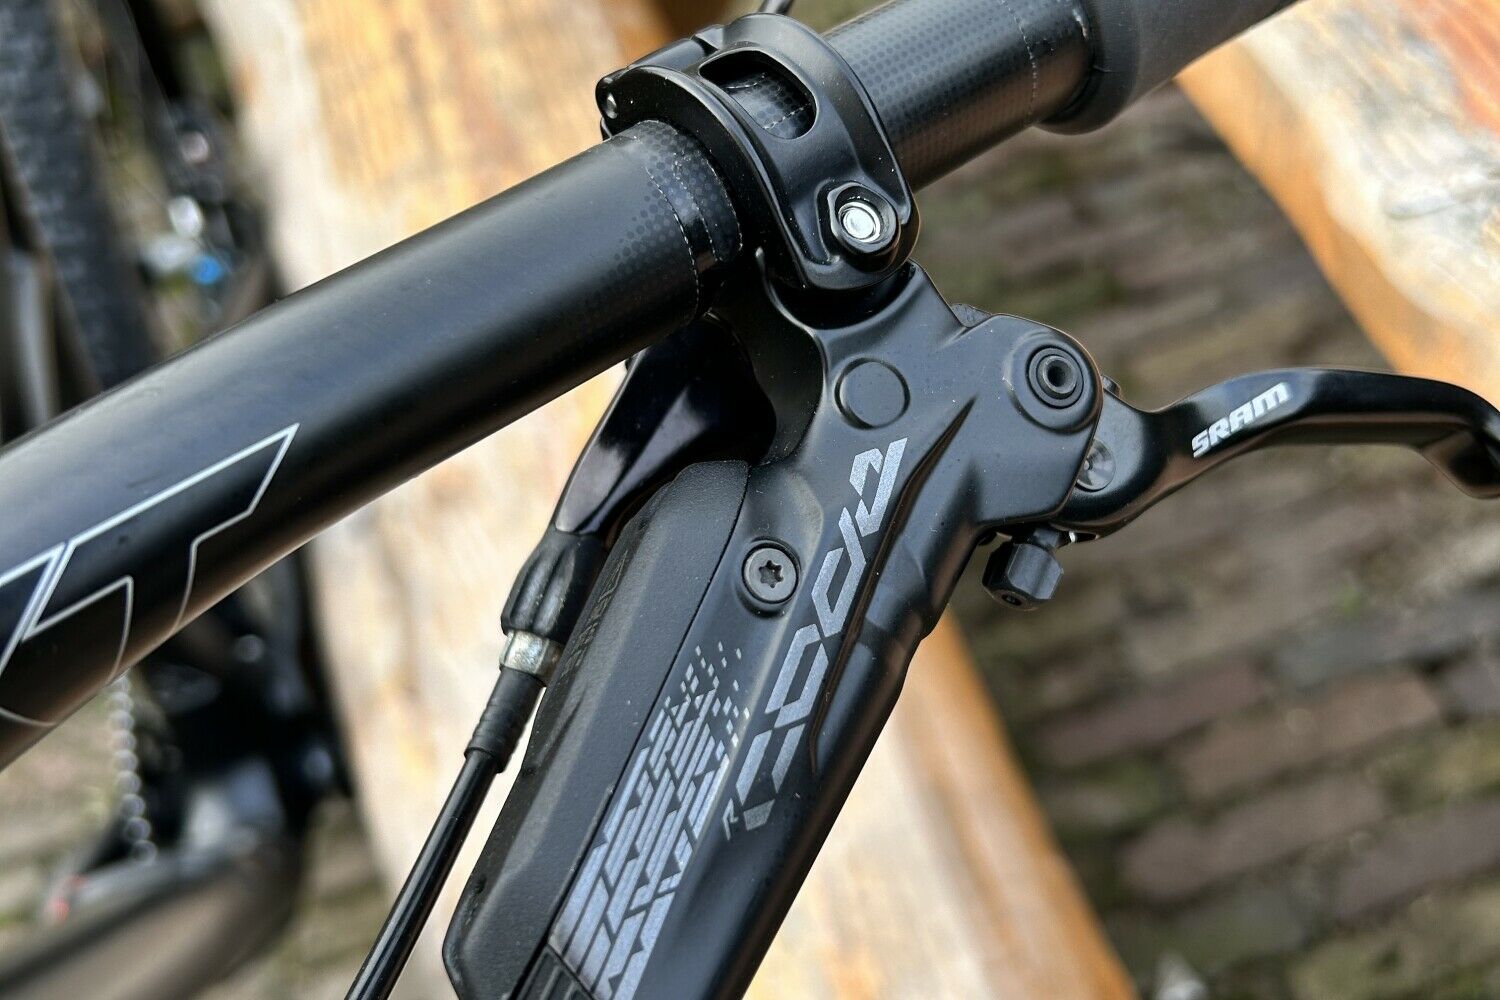 Specialized Camber Elite